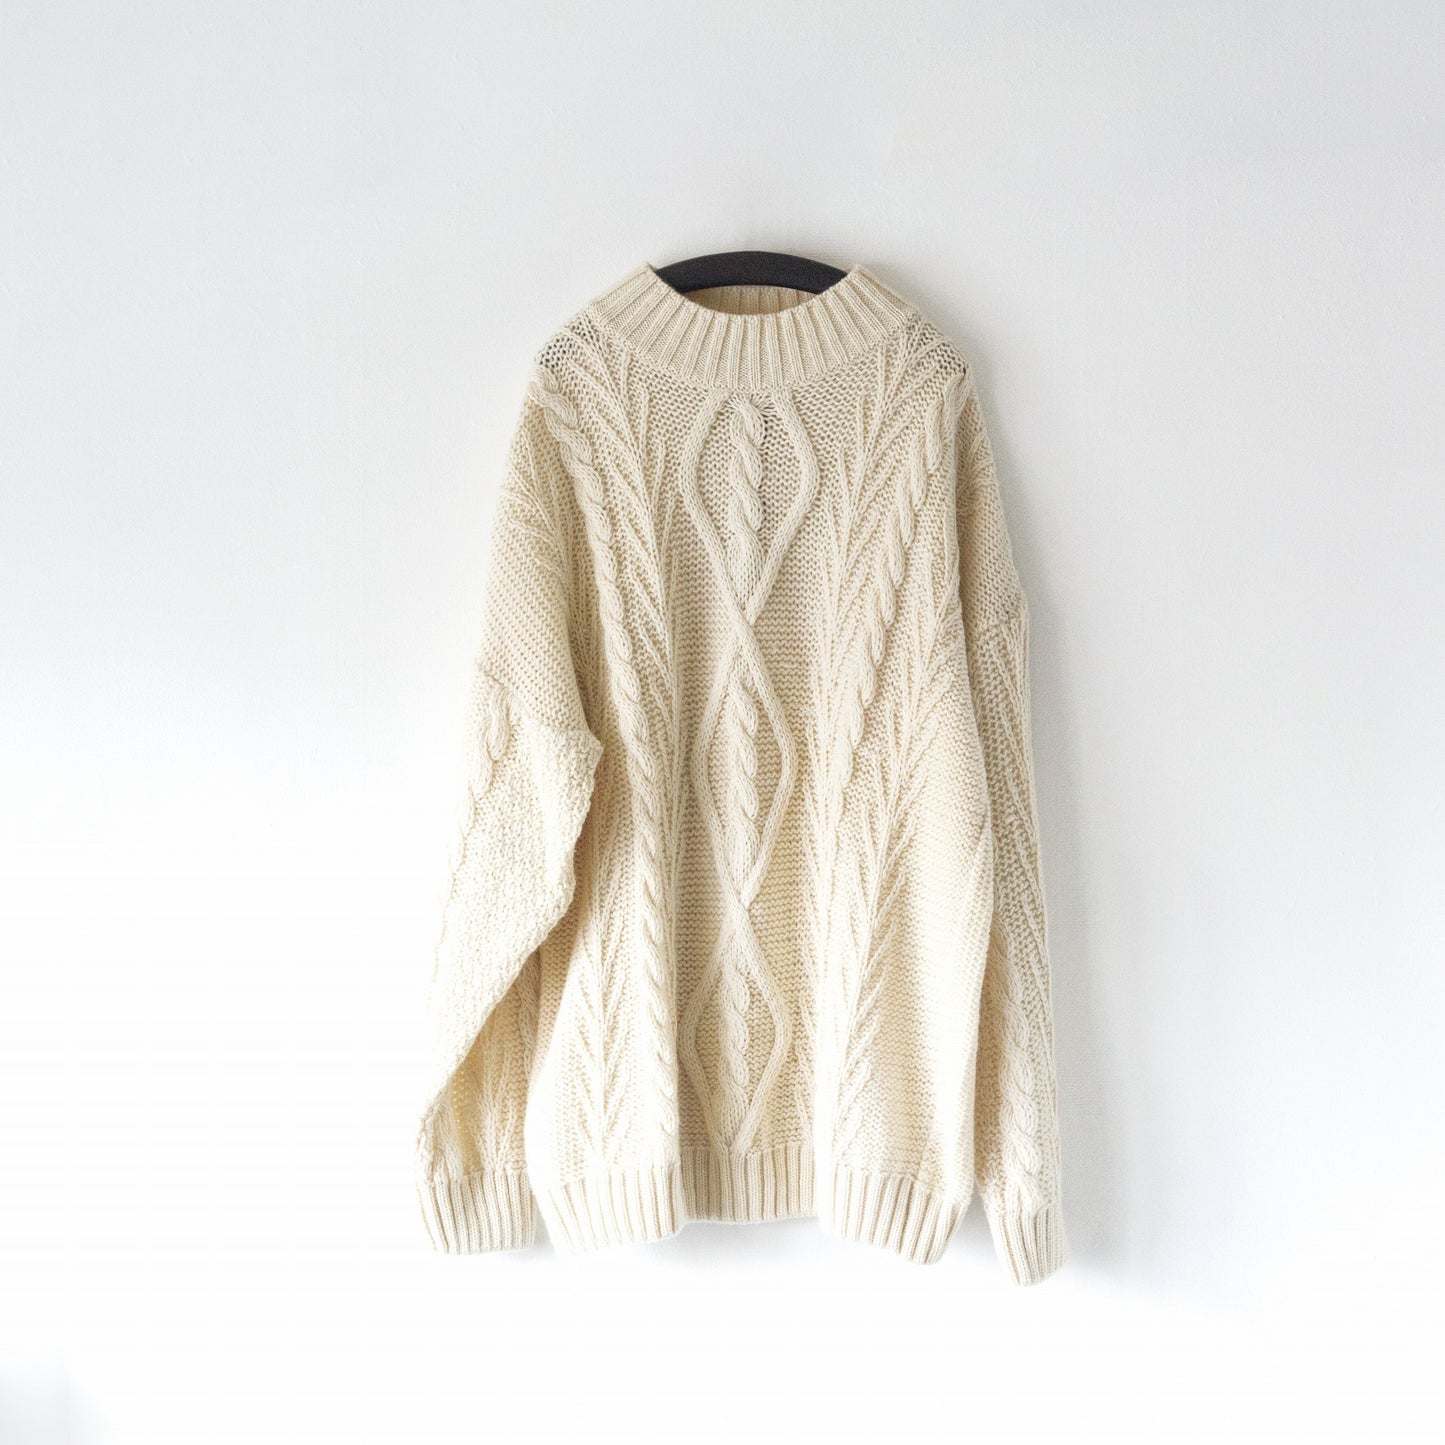 White cable knit sweater